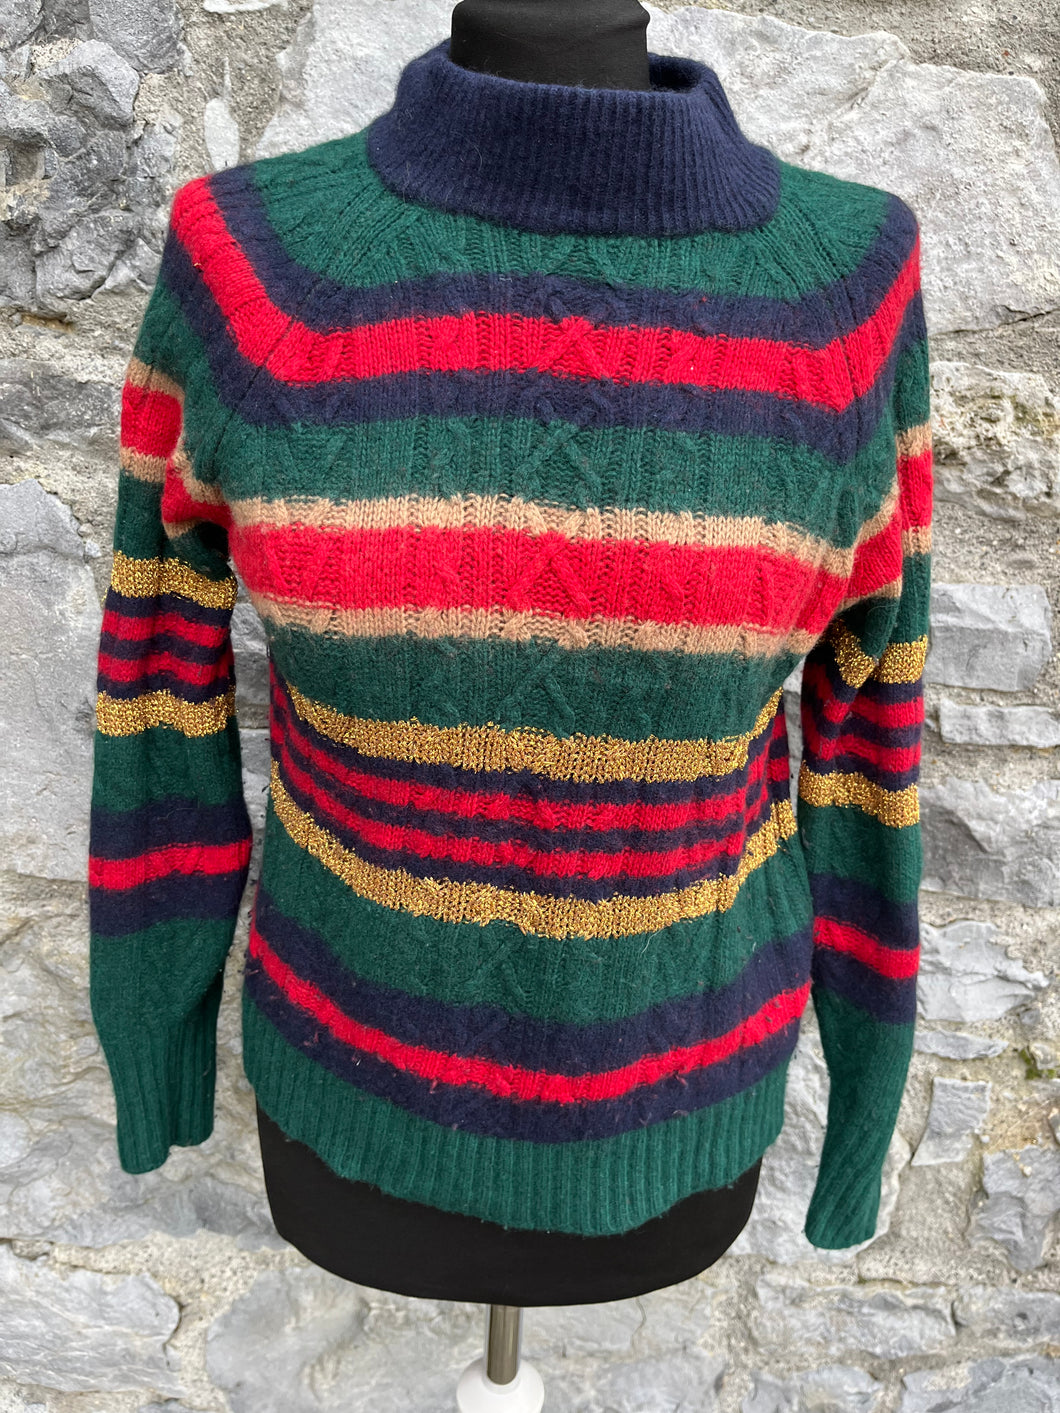 Green&red woolly jumper uk 6-8